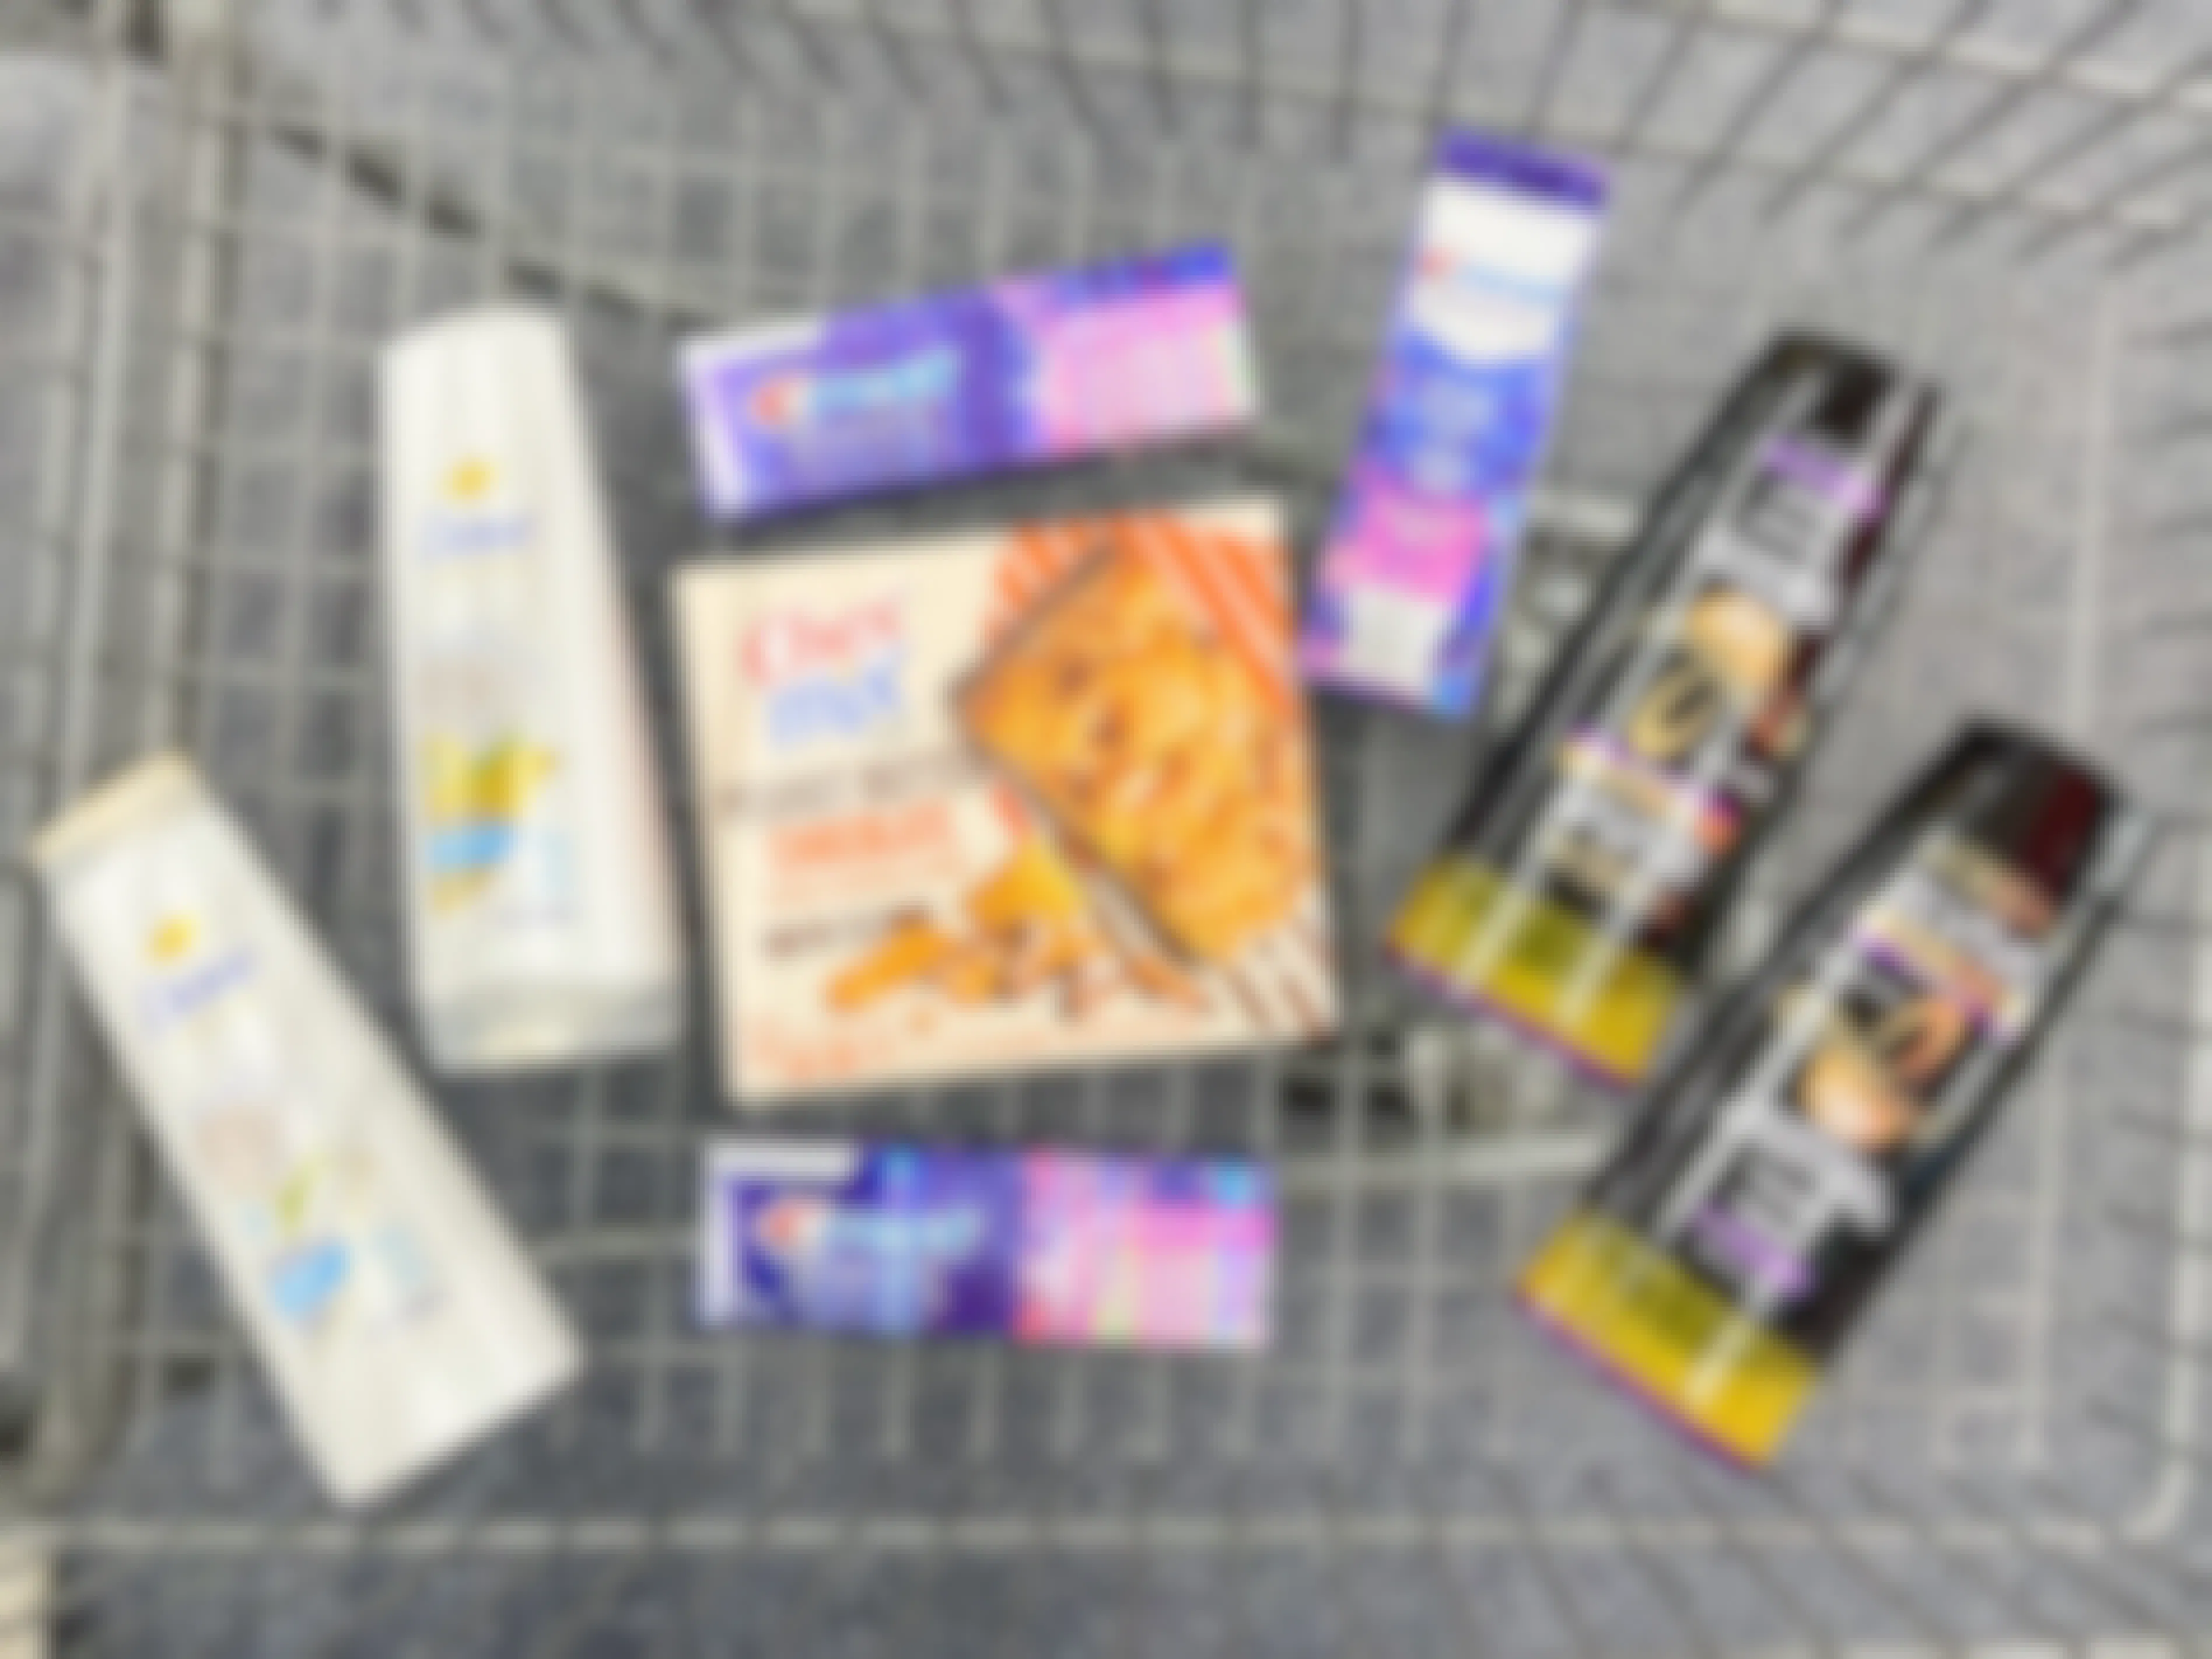 a cvs shopping cart filled with grocery items, l'oreal and dove shampoo and conditioner, chex mix cereal bars, crest toothpaste